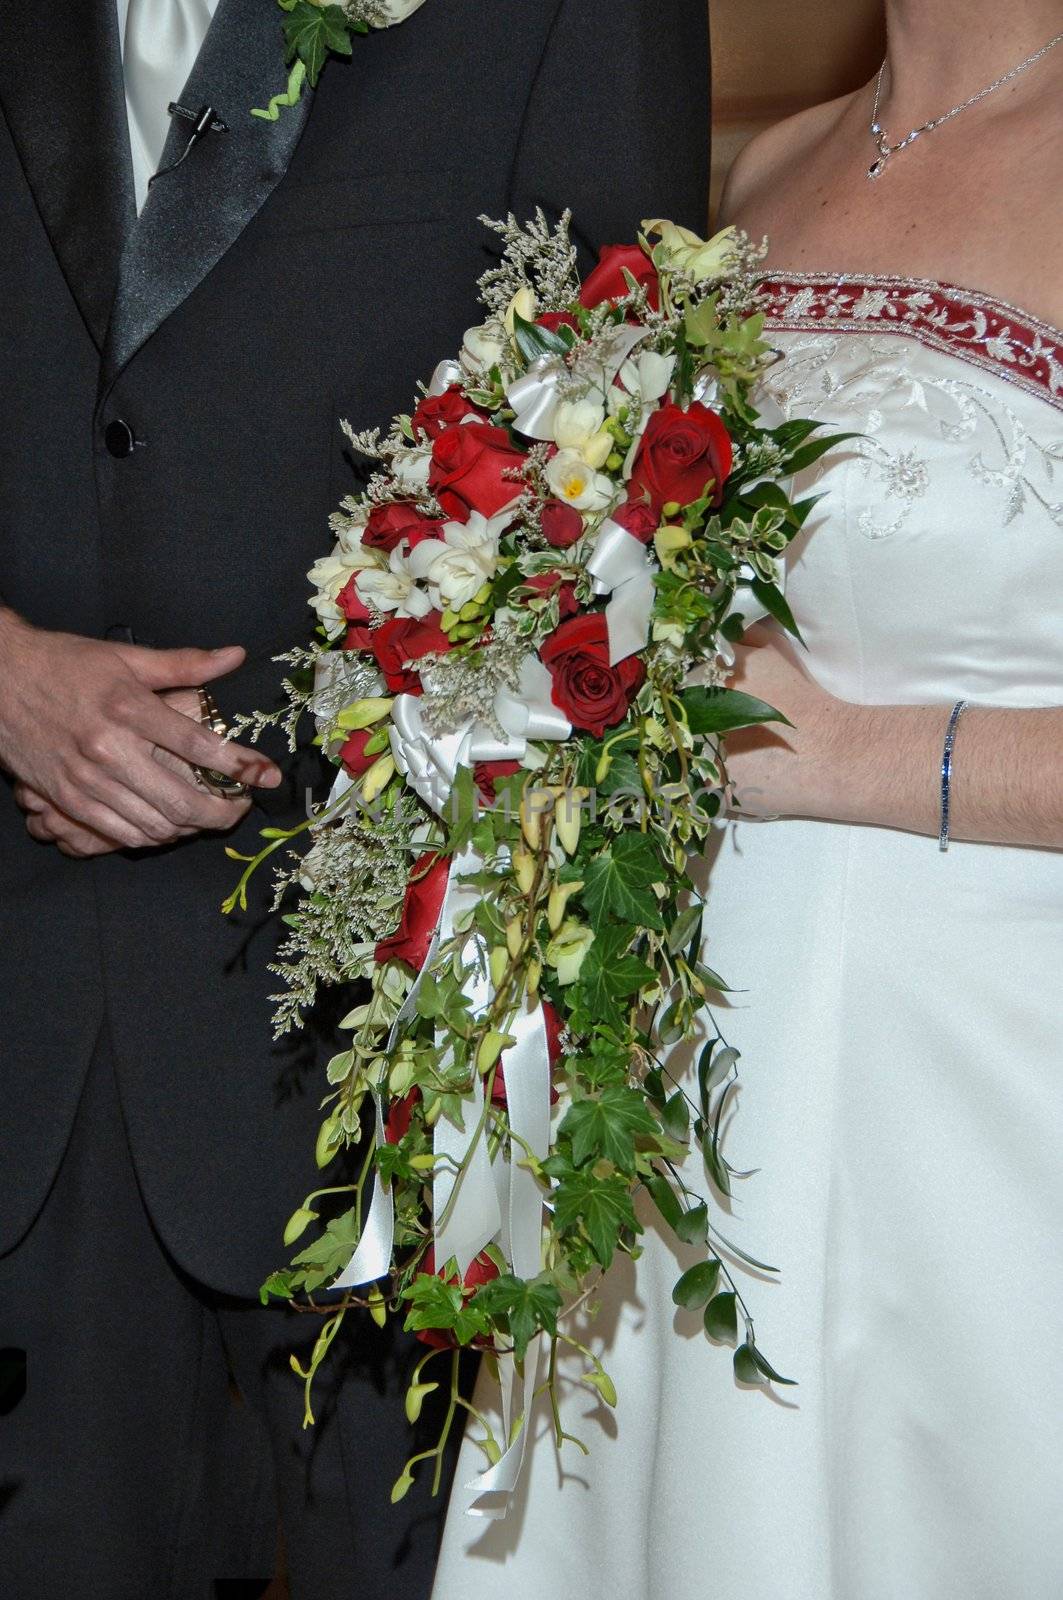 A bride and groom with the brides flowers